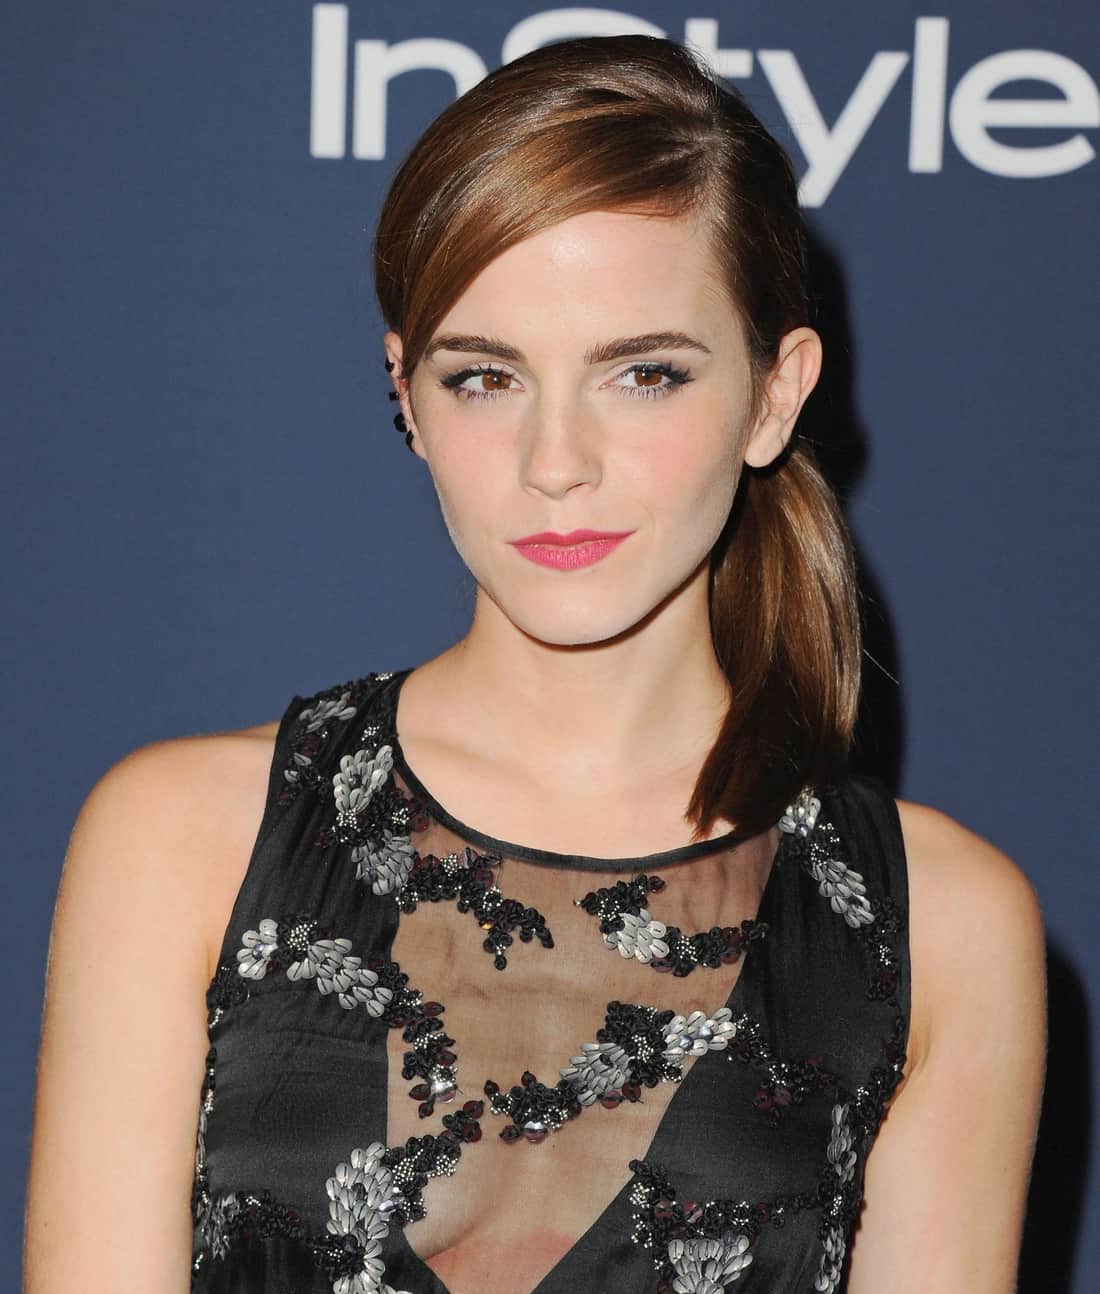 Emma Watson Wore a Dark Sheer Dress at the Golden Globes Afterparty